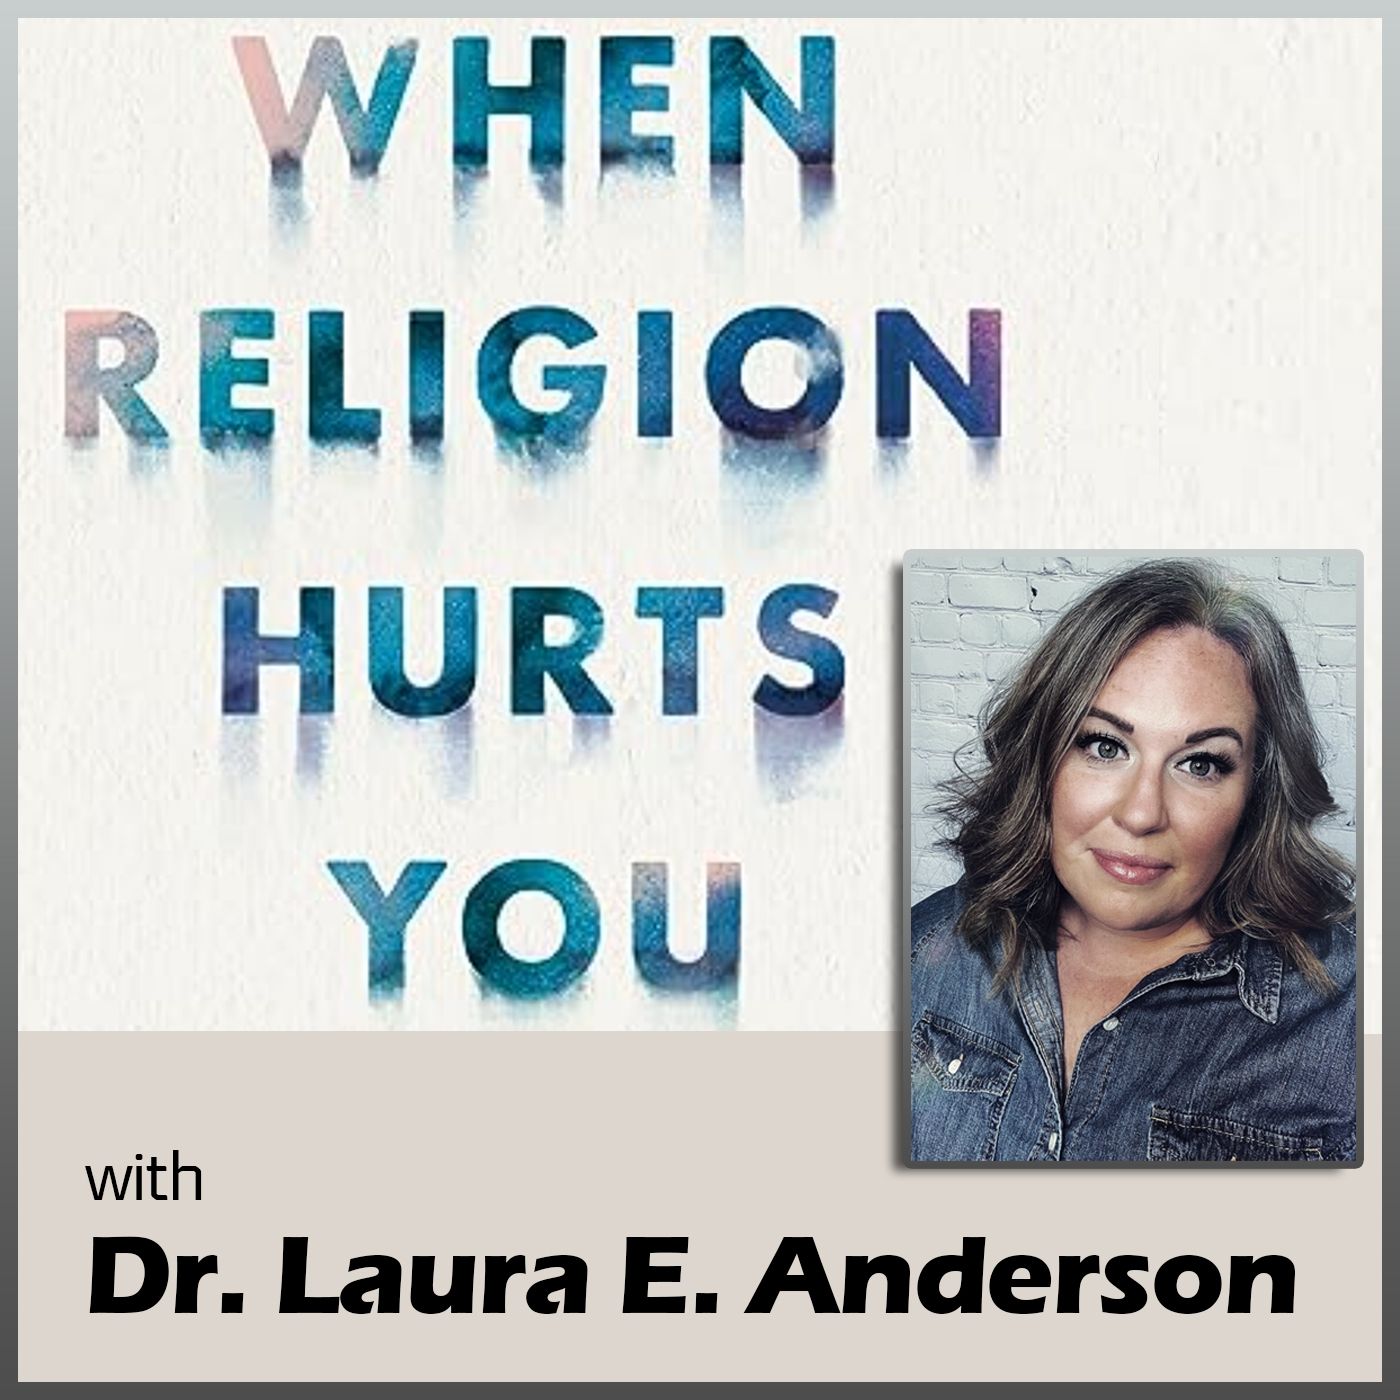 When Religion Hurts You: with Dr. Laura E. Anderson